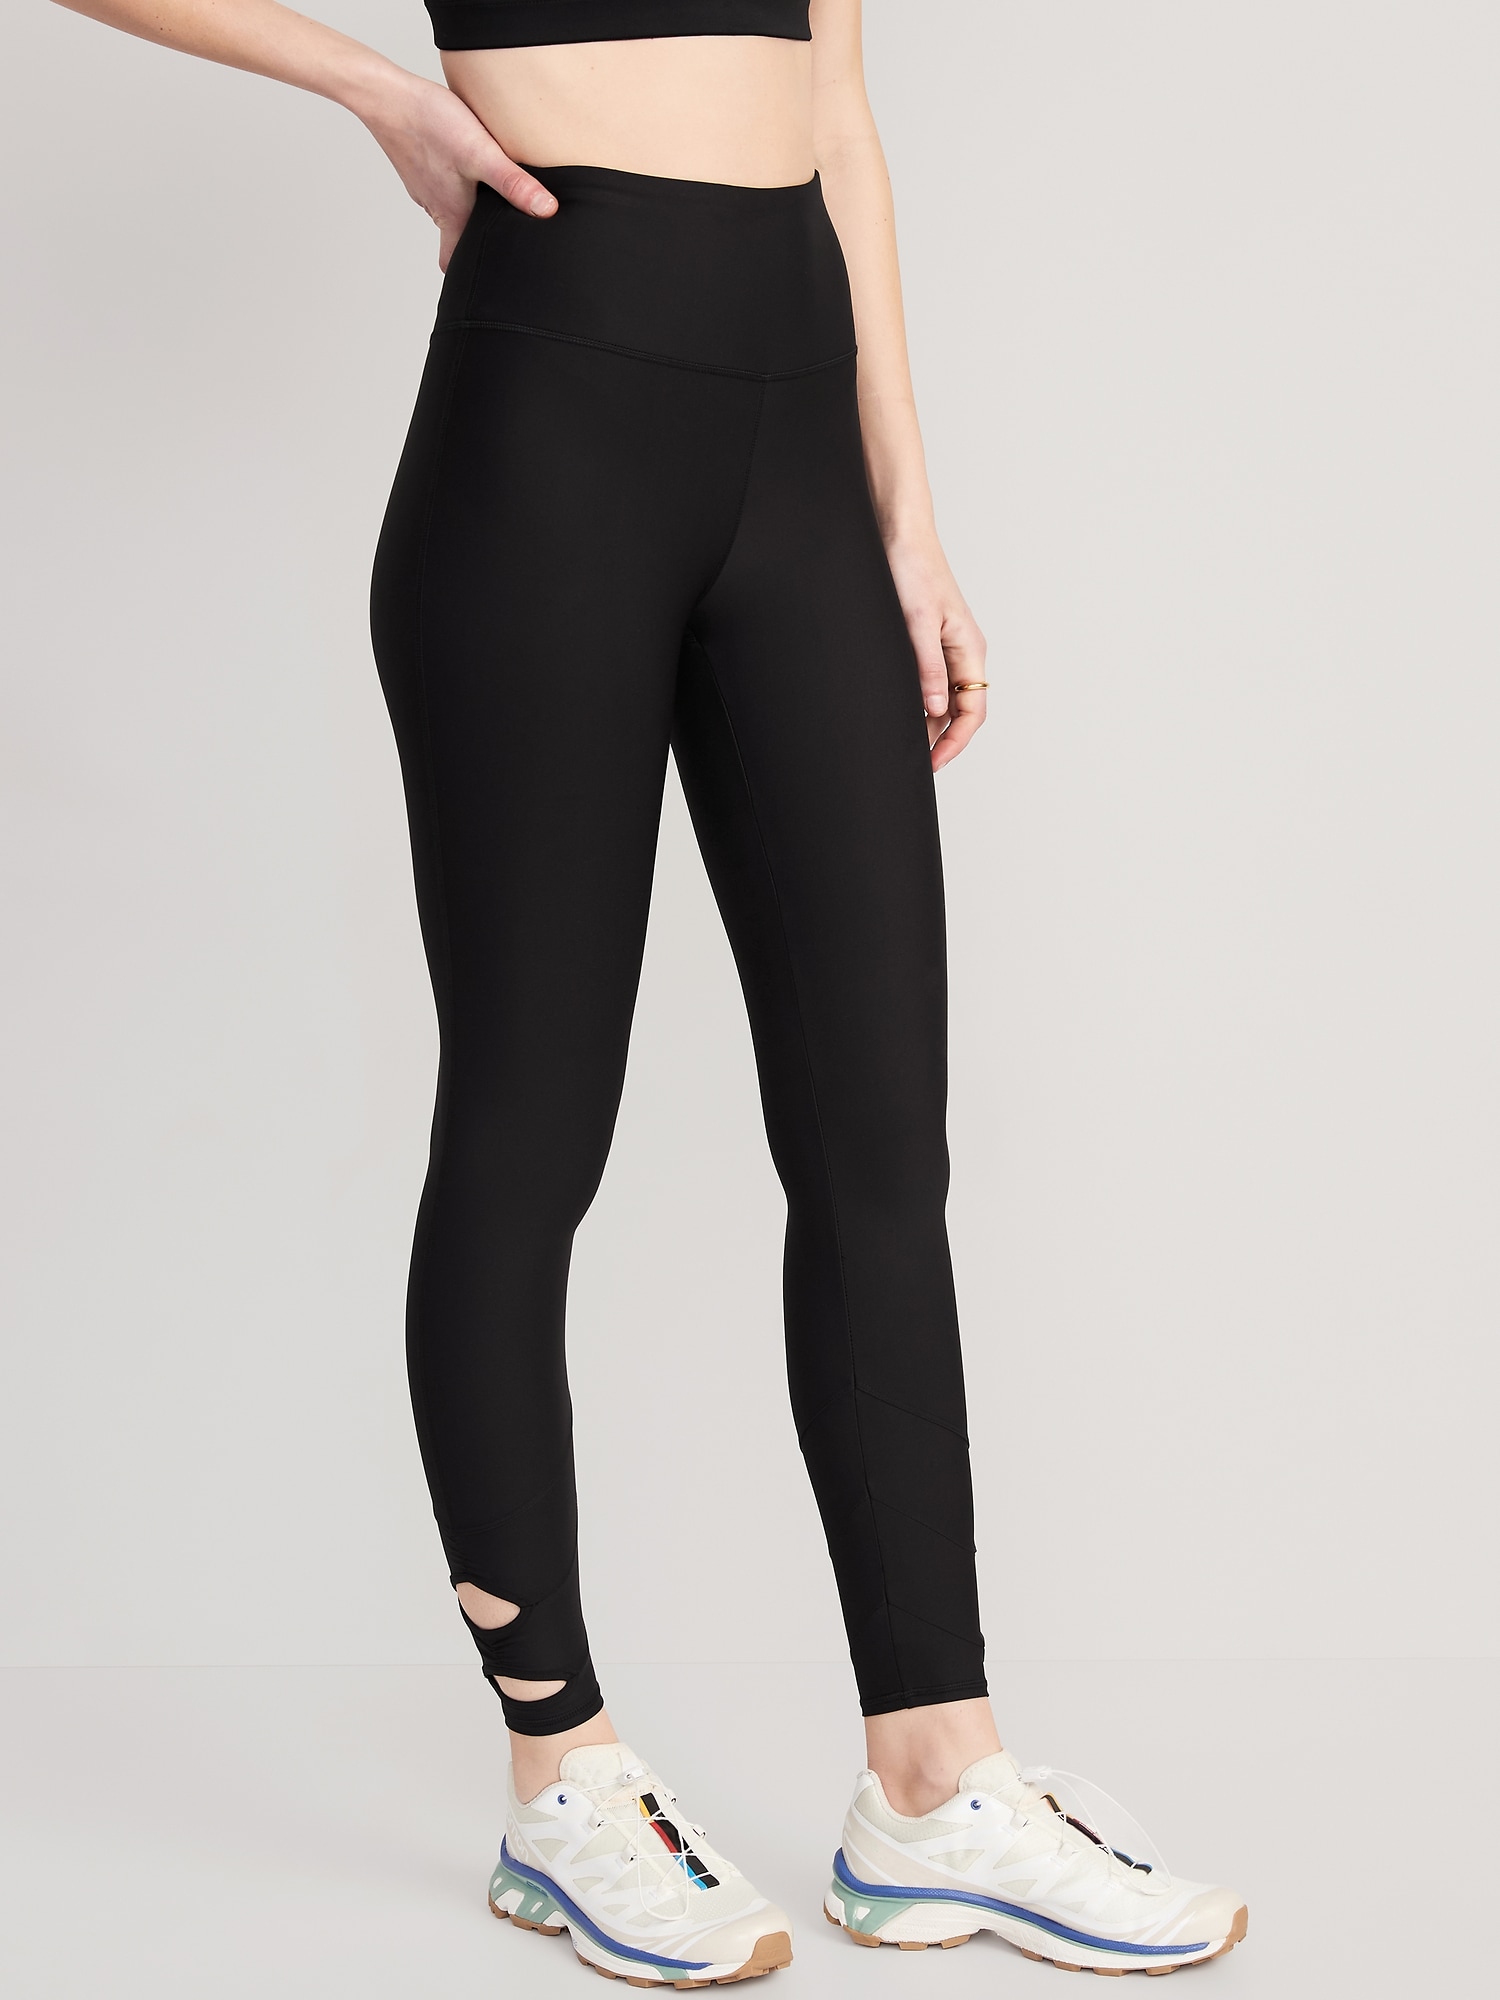 High-Waisted PowerSoft 7/8 Cutout Leggings | Old Navy